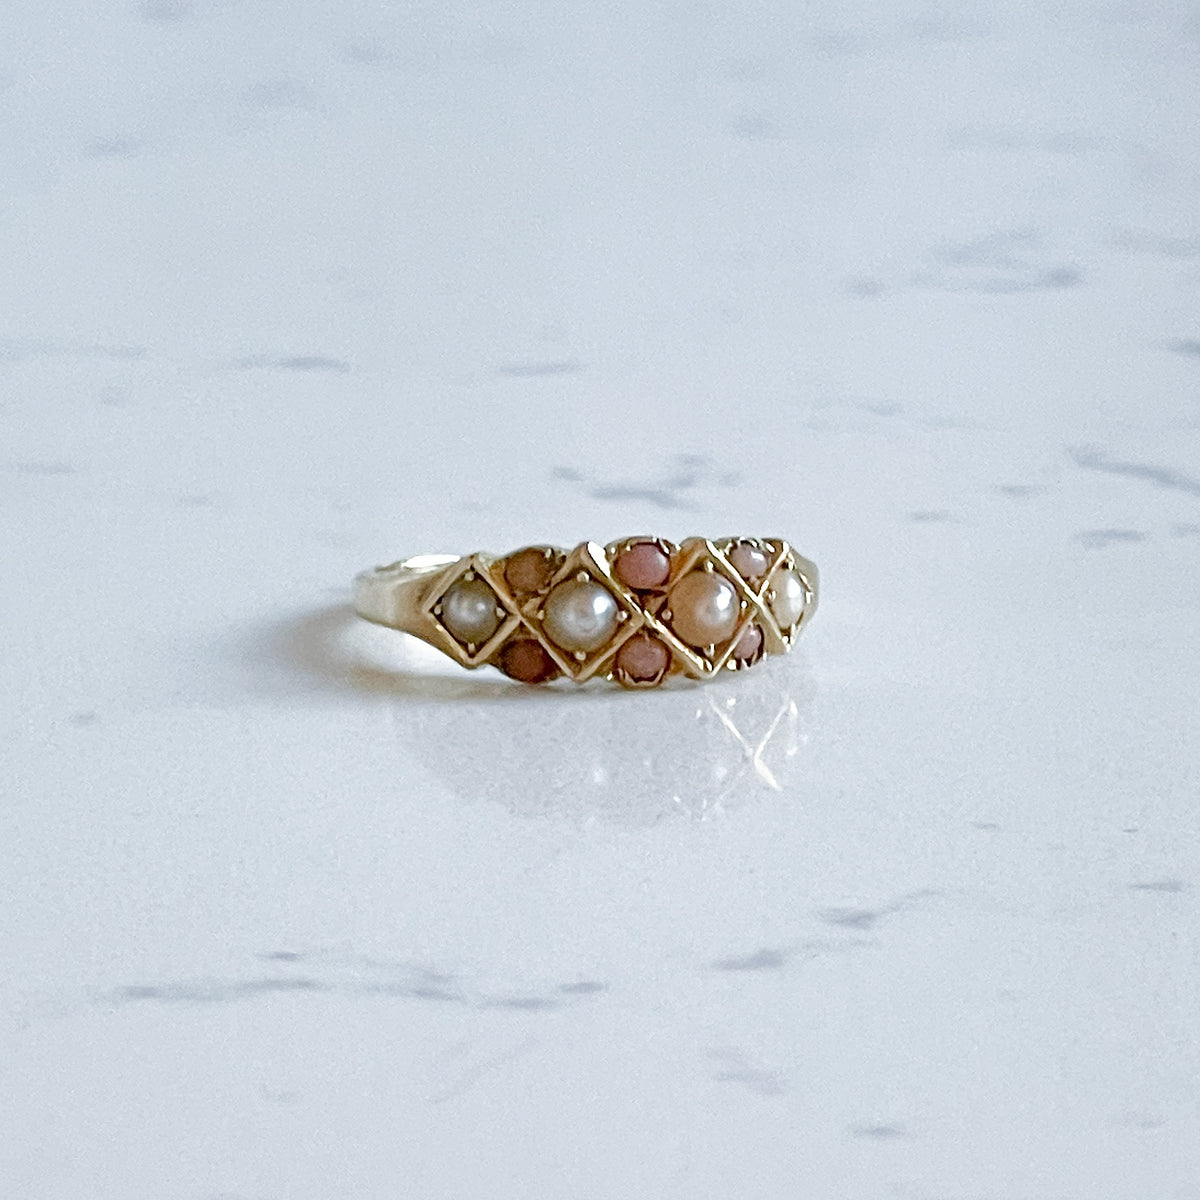 Antique 18K Gold Ring with Coral and Pearl